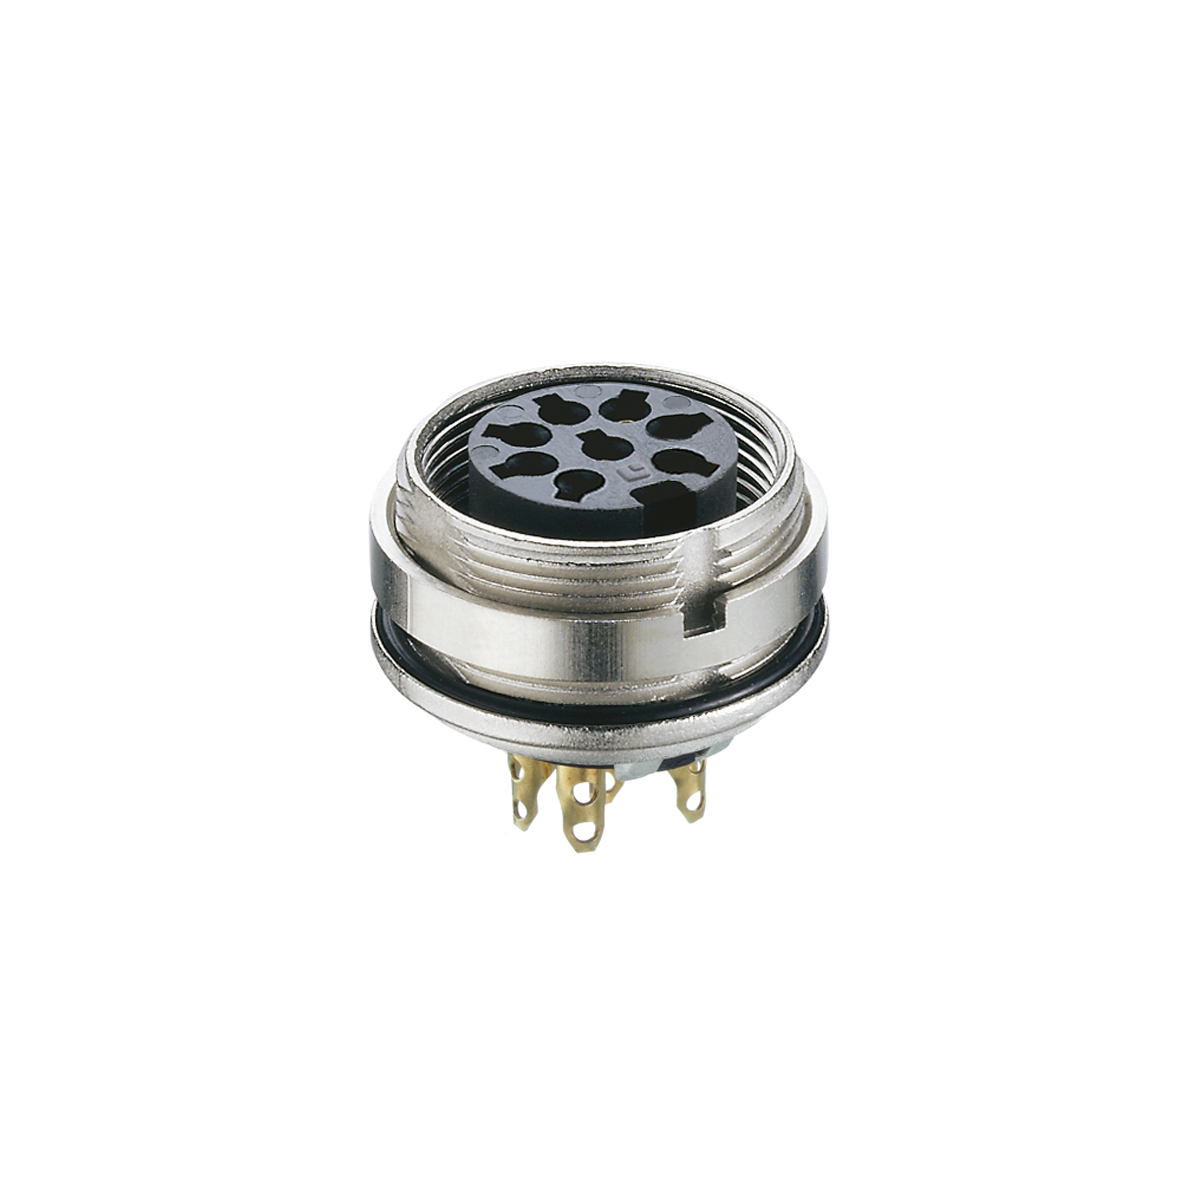 Lumberg: 0305-1 (Series 03 | Circular connectors with threaded joint M16 acc. to IEC 61076-2-106, IP40/IP68)